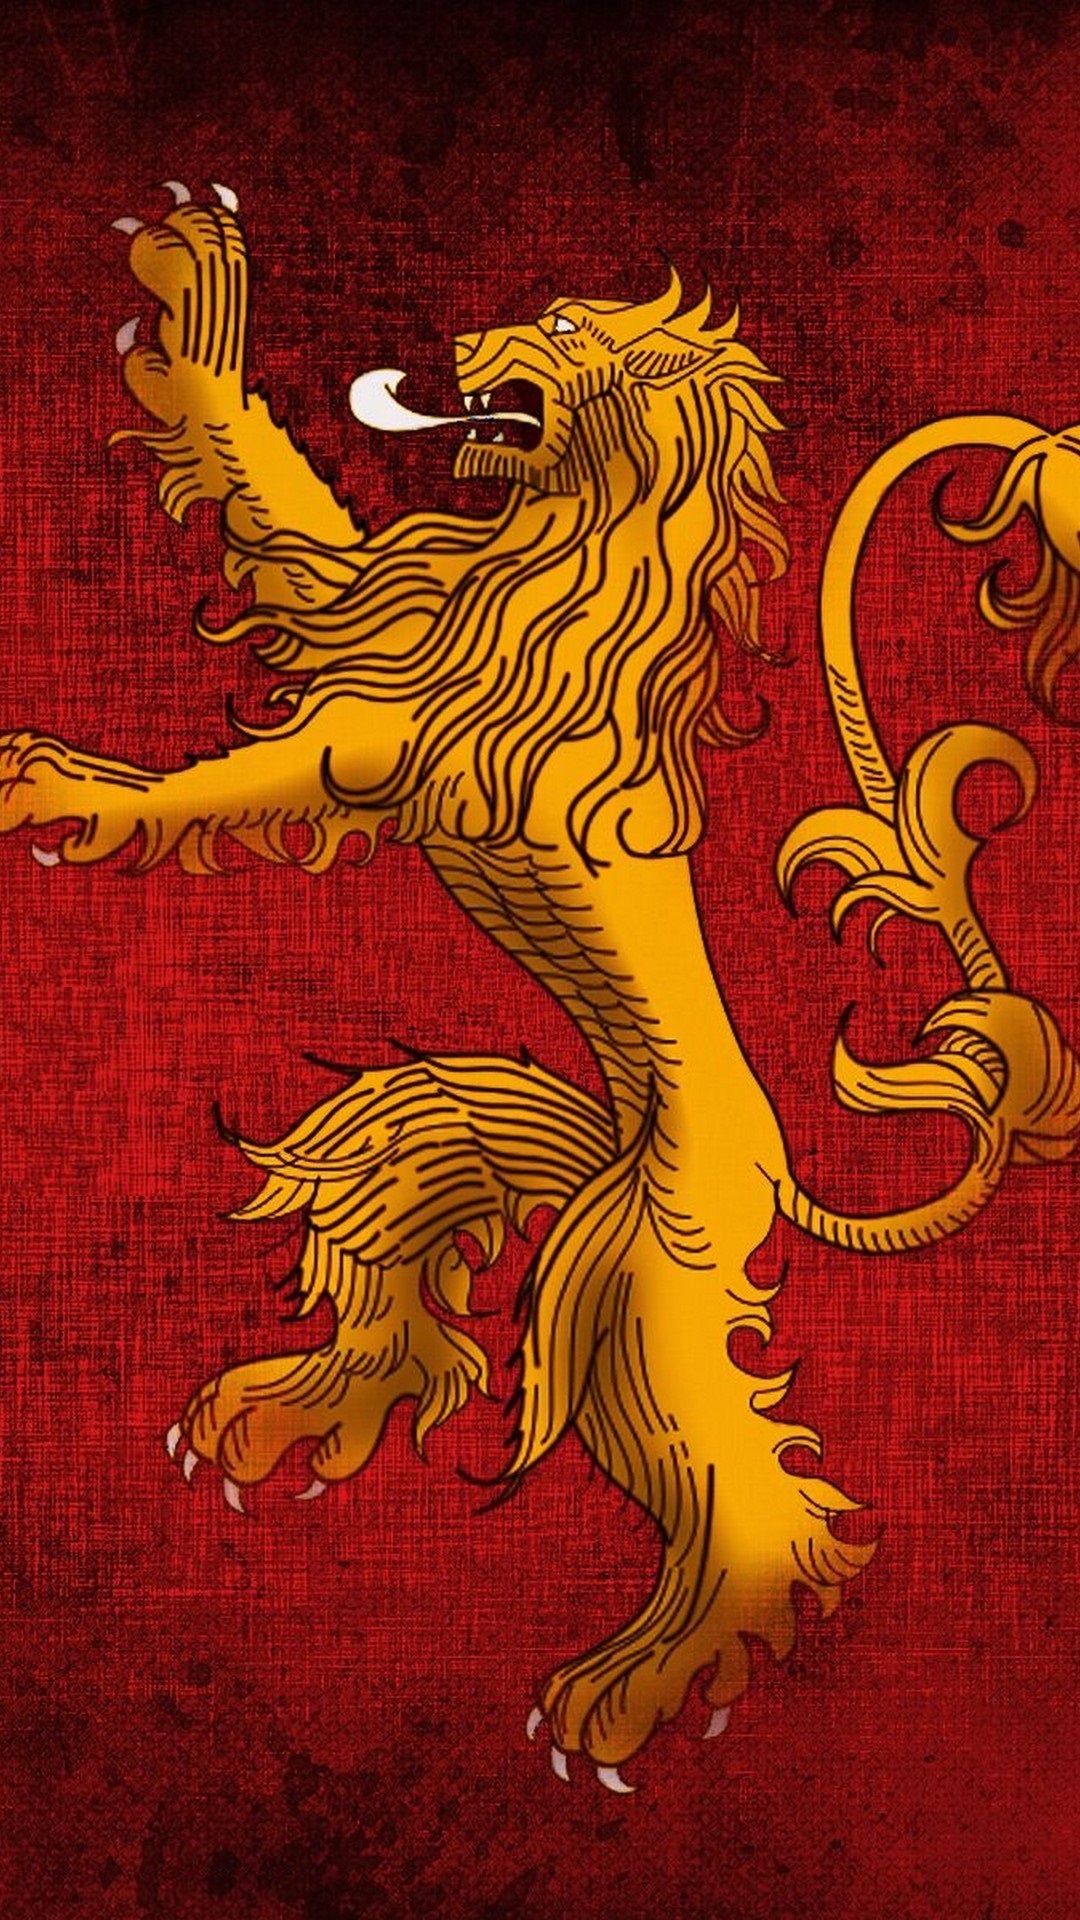 House Lannister Game of Thrones iPhone Wallpaper With high-resolution 1080X1920 pixel. You can use this wallpaper for your iPhone 5, 6, 7, 8, X, XS, XR backgrounds, Mobile Screensaver, or iPad Lock Screen